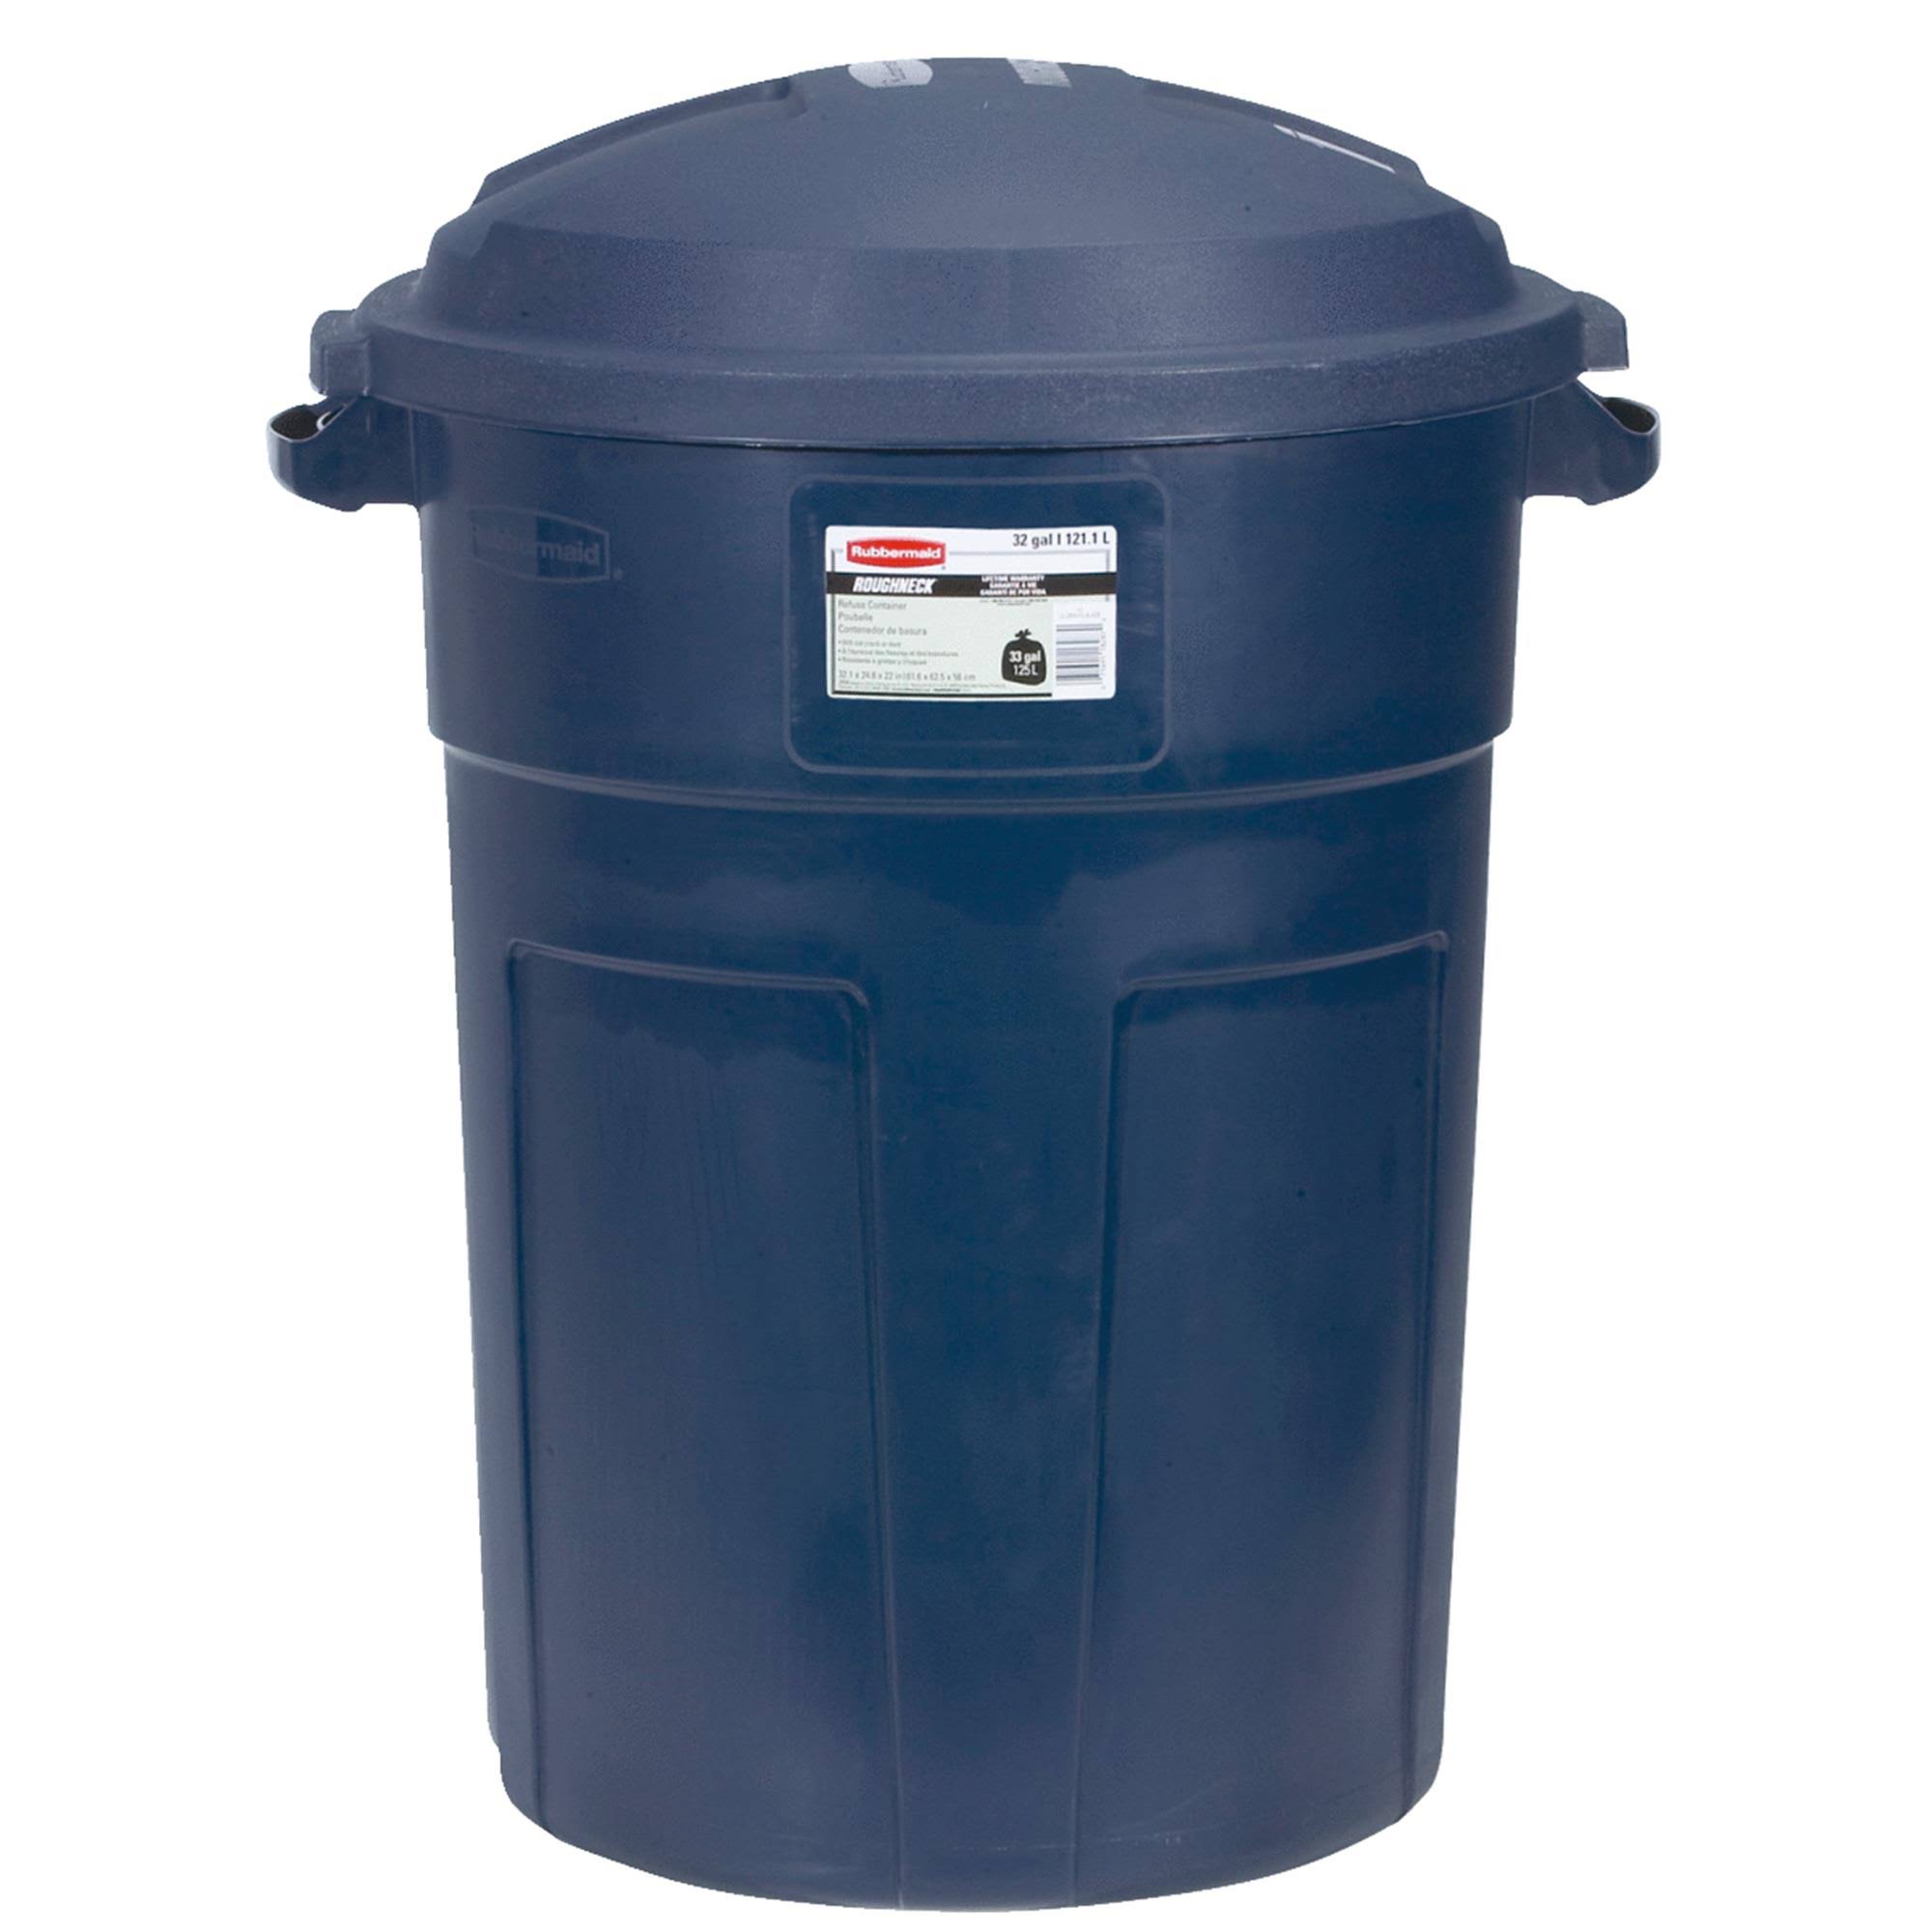 Rubbermaid Roughneck Round Refuse Trash Can